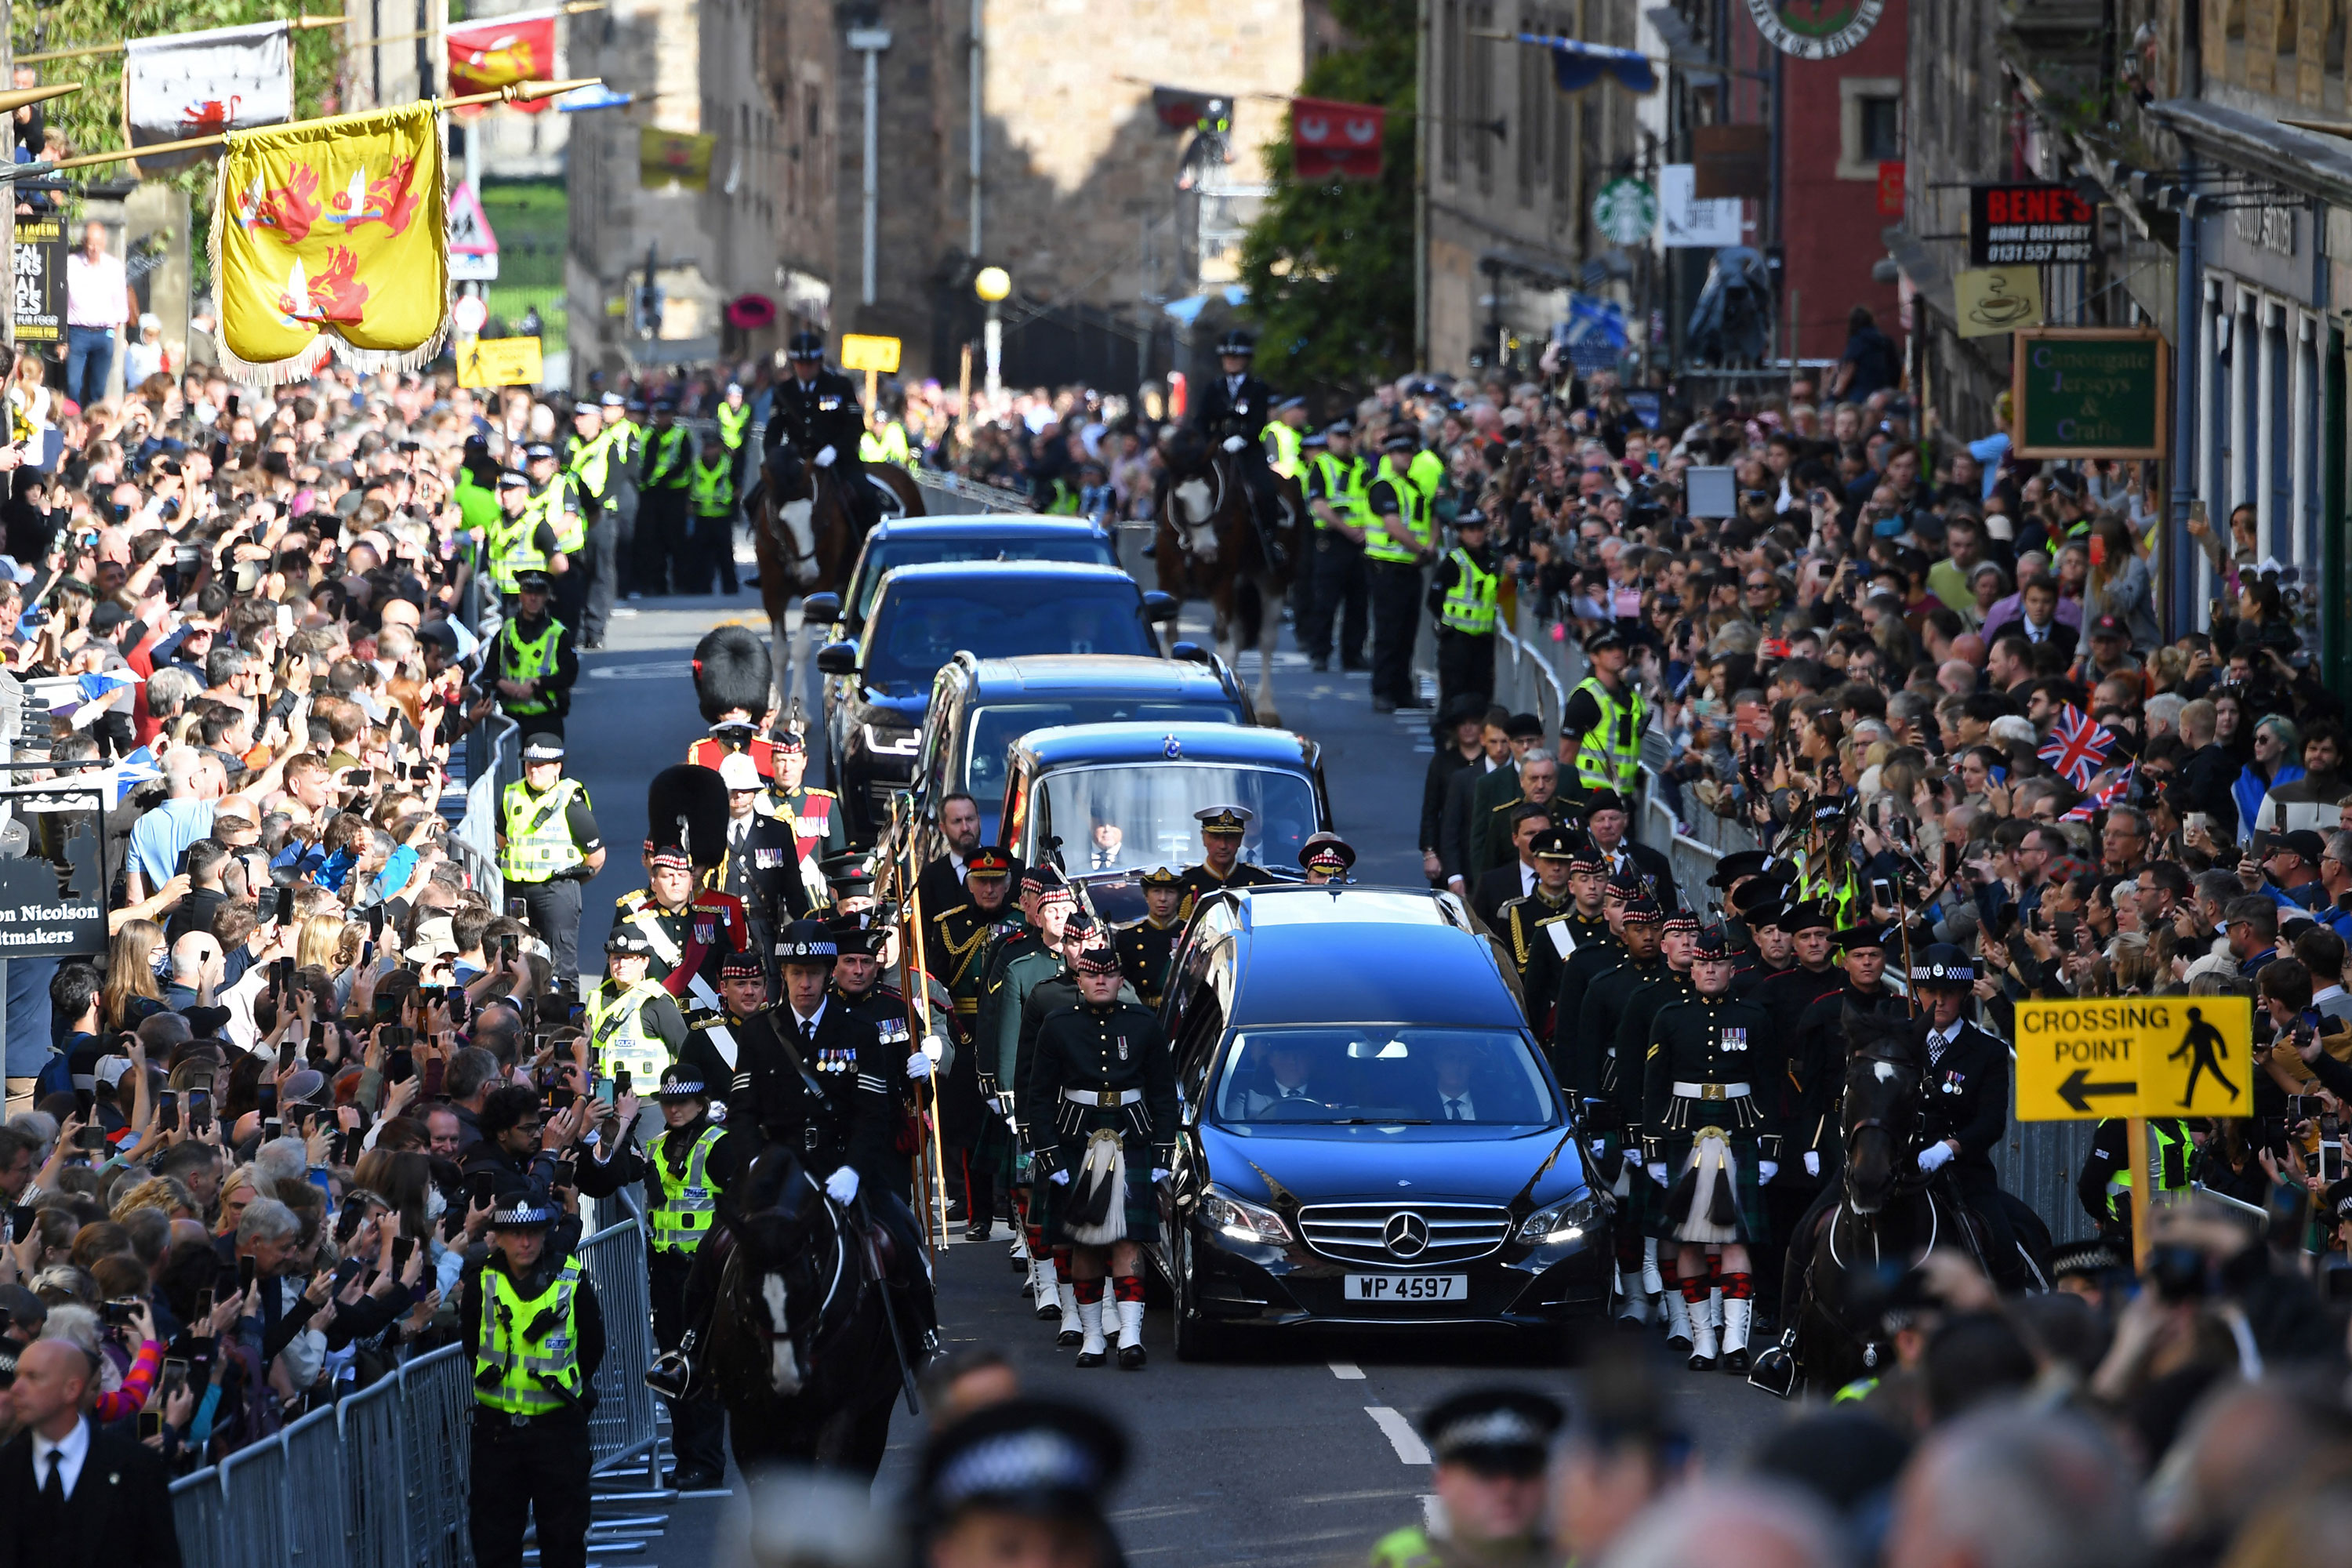 Queen's coffin arrives at St. Giles' Cathedral after somber journey ...